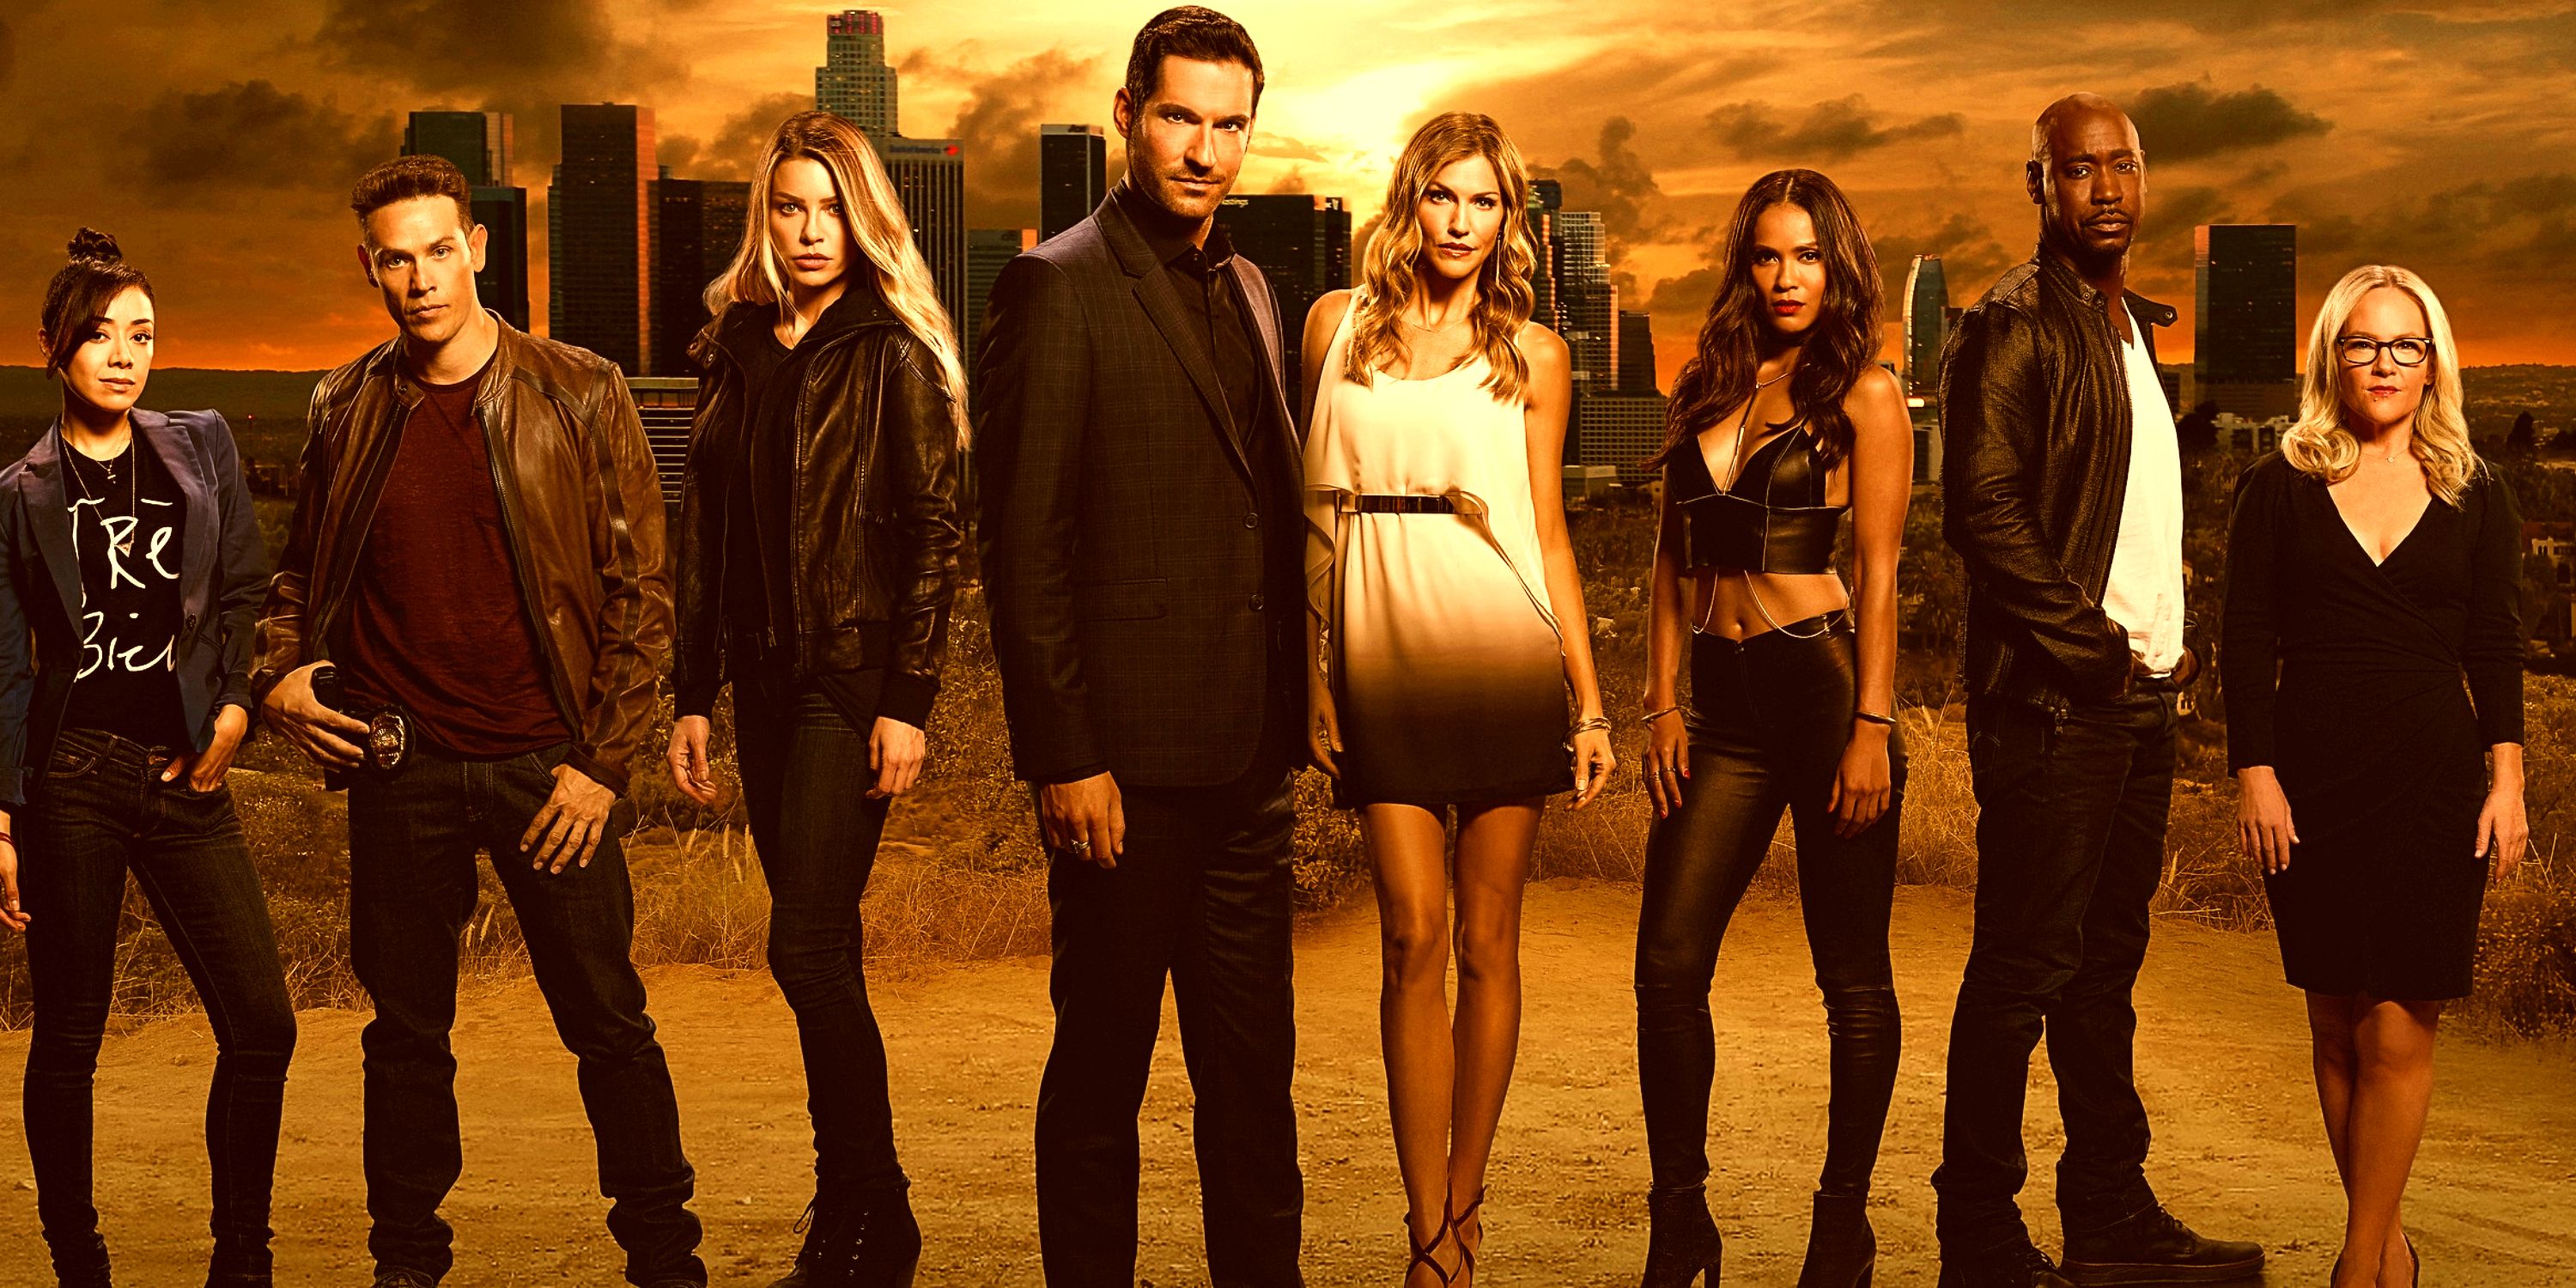 Lucifer Season 5 Cast in front of the city skyline